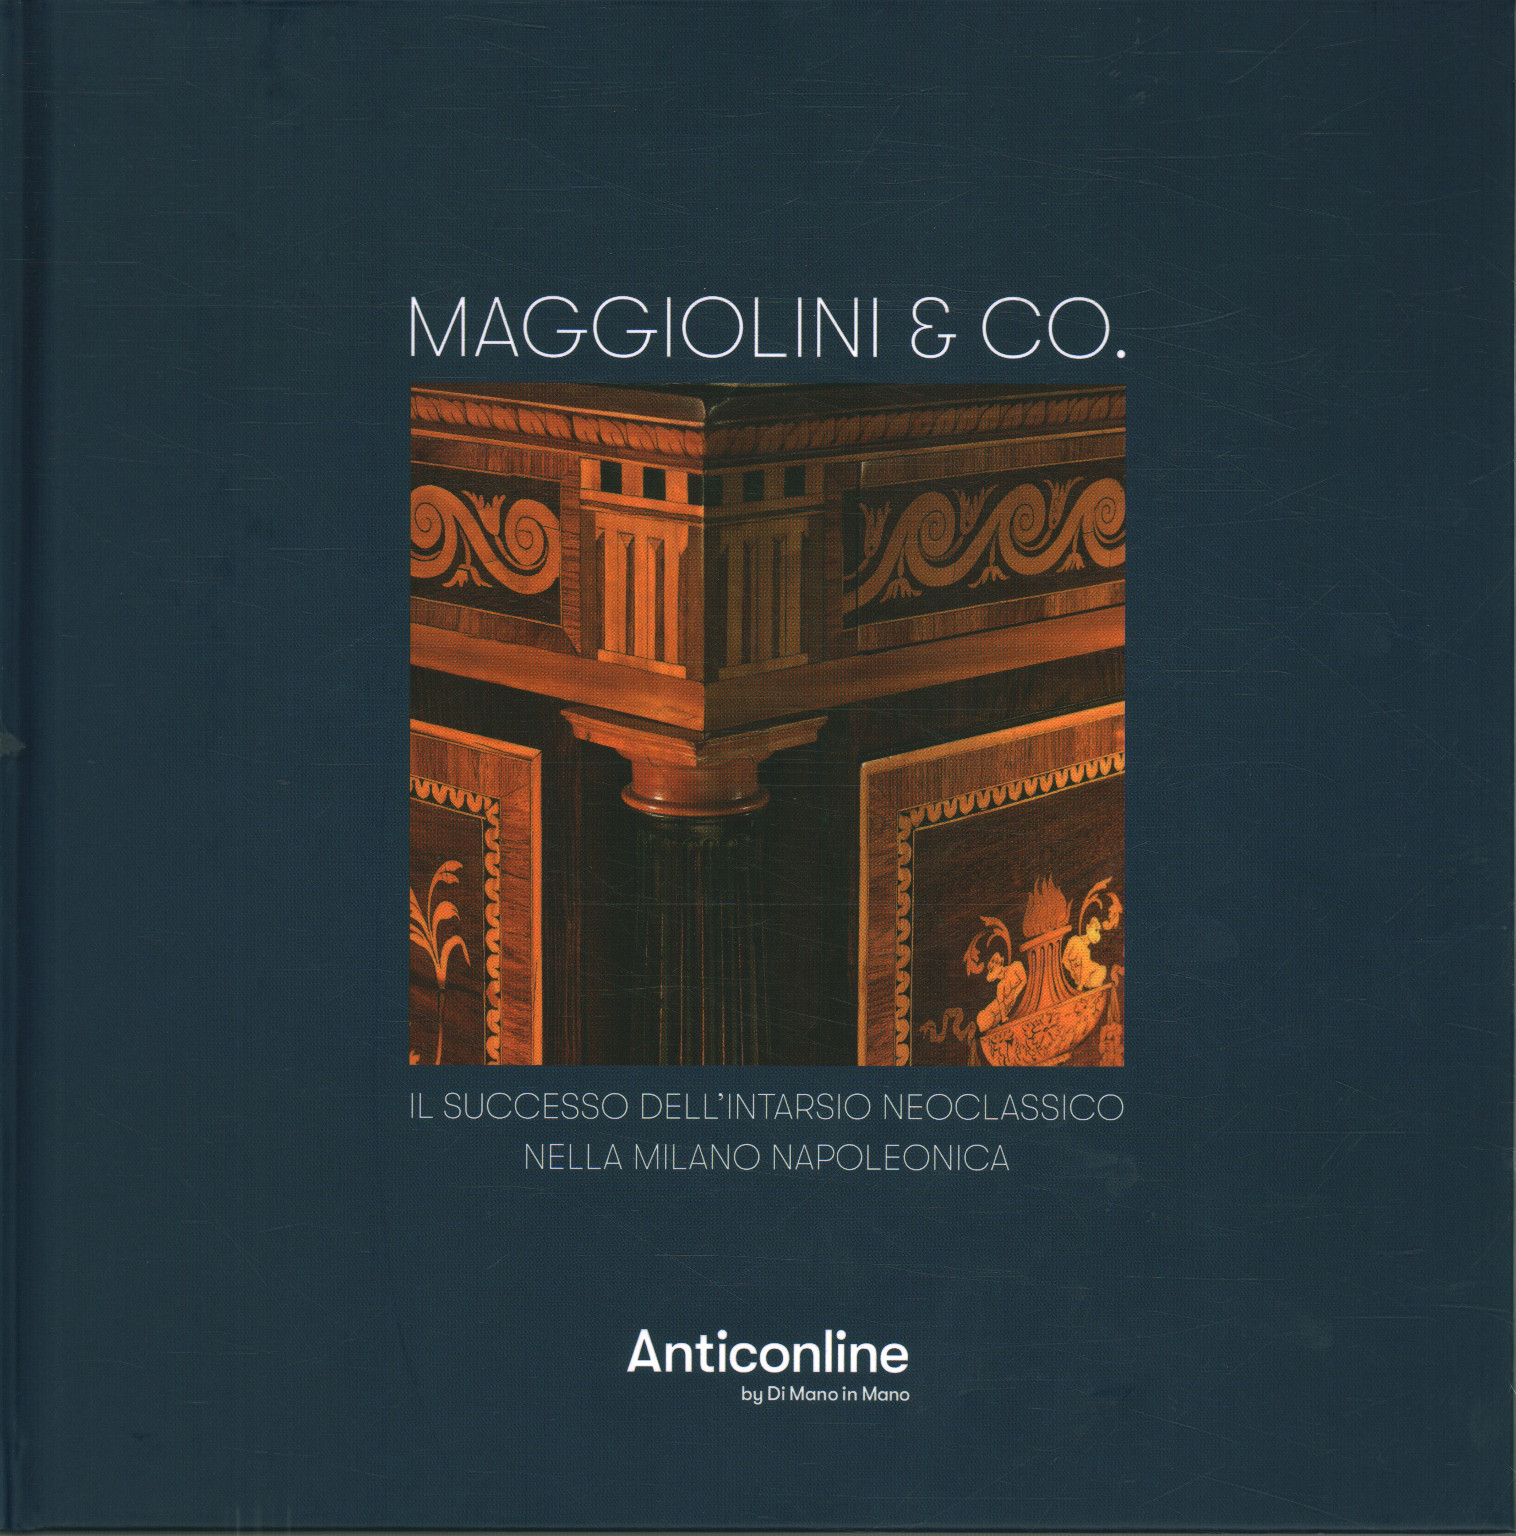 Maggiolini & CO. The success of the neoclassical inlay in Napoleonic Milan